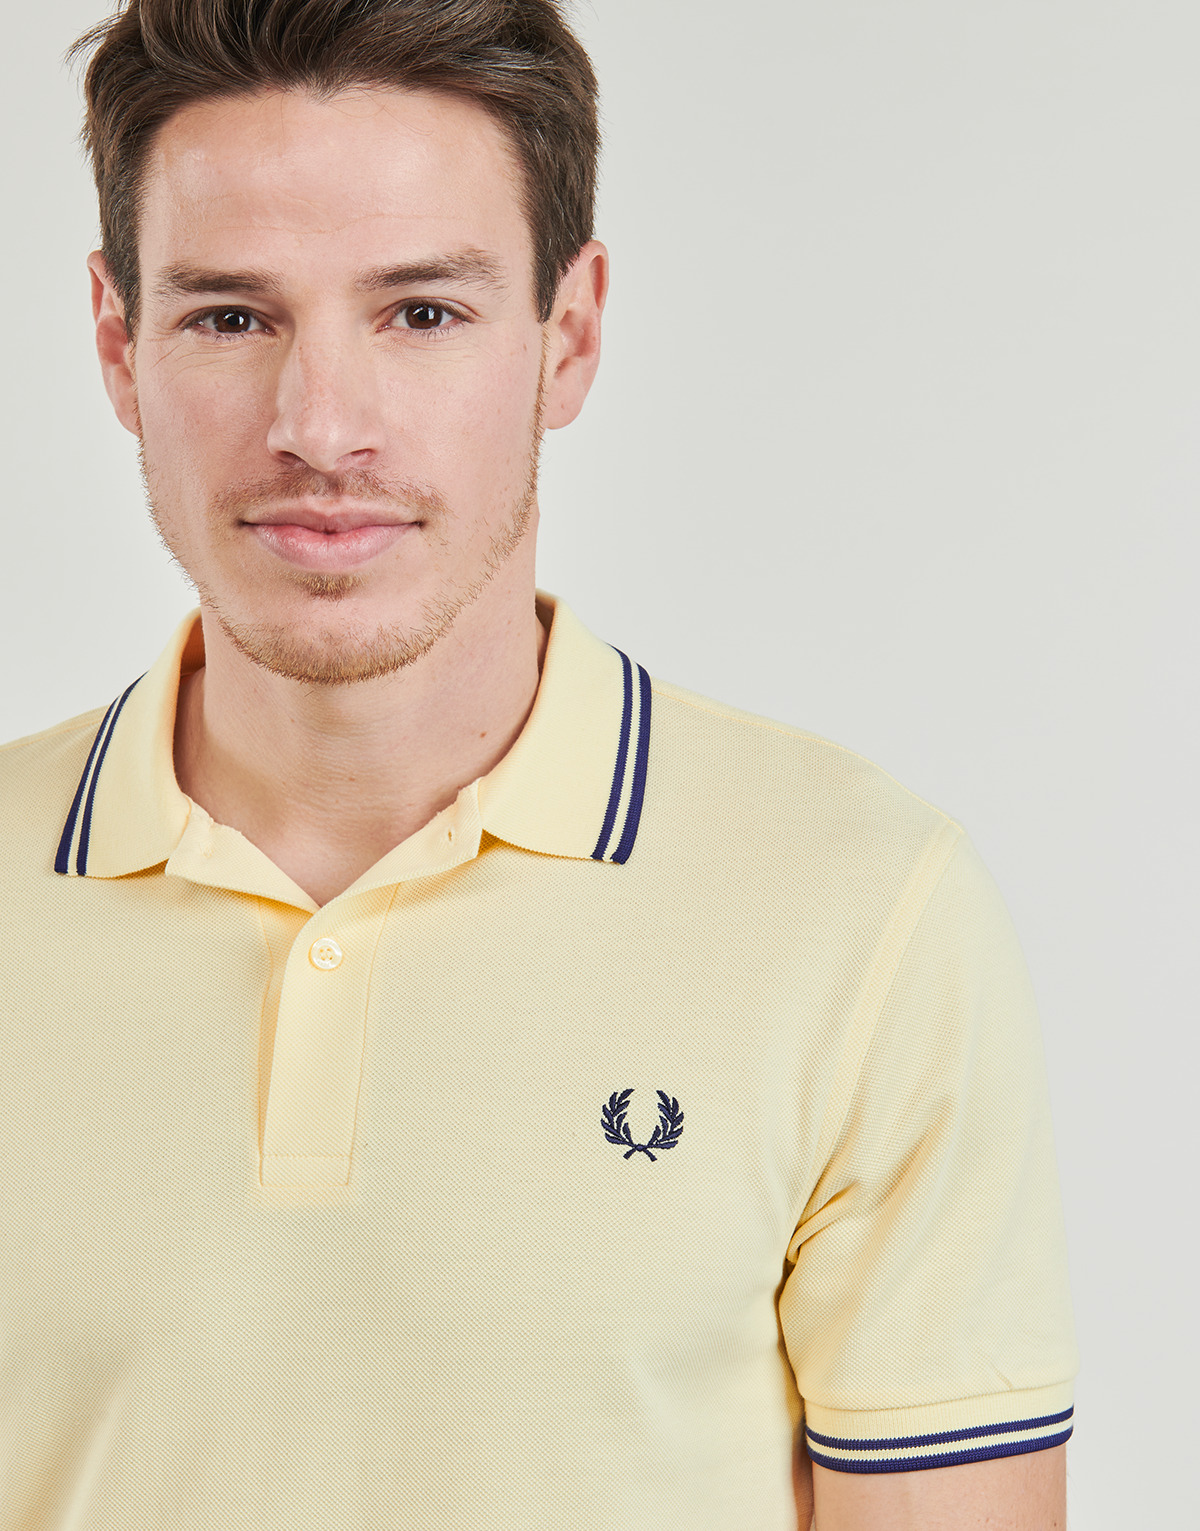 Fred Perry Jaune / Marine TWIN TIPPED FRED PERRY SHIRT rRAeH9cM